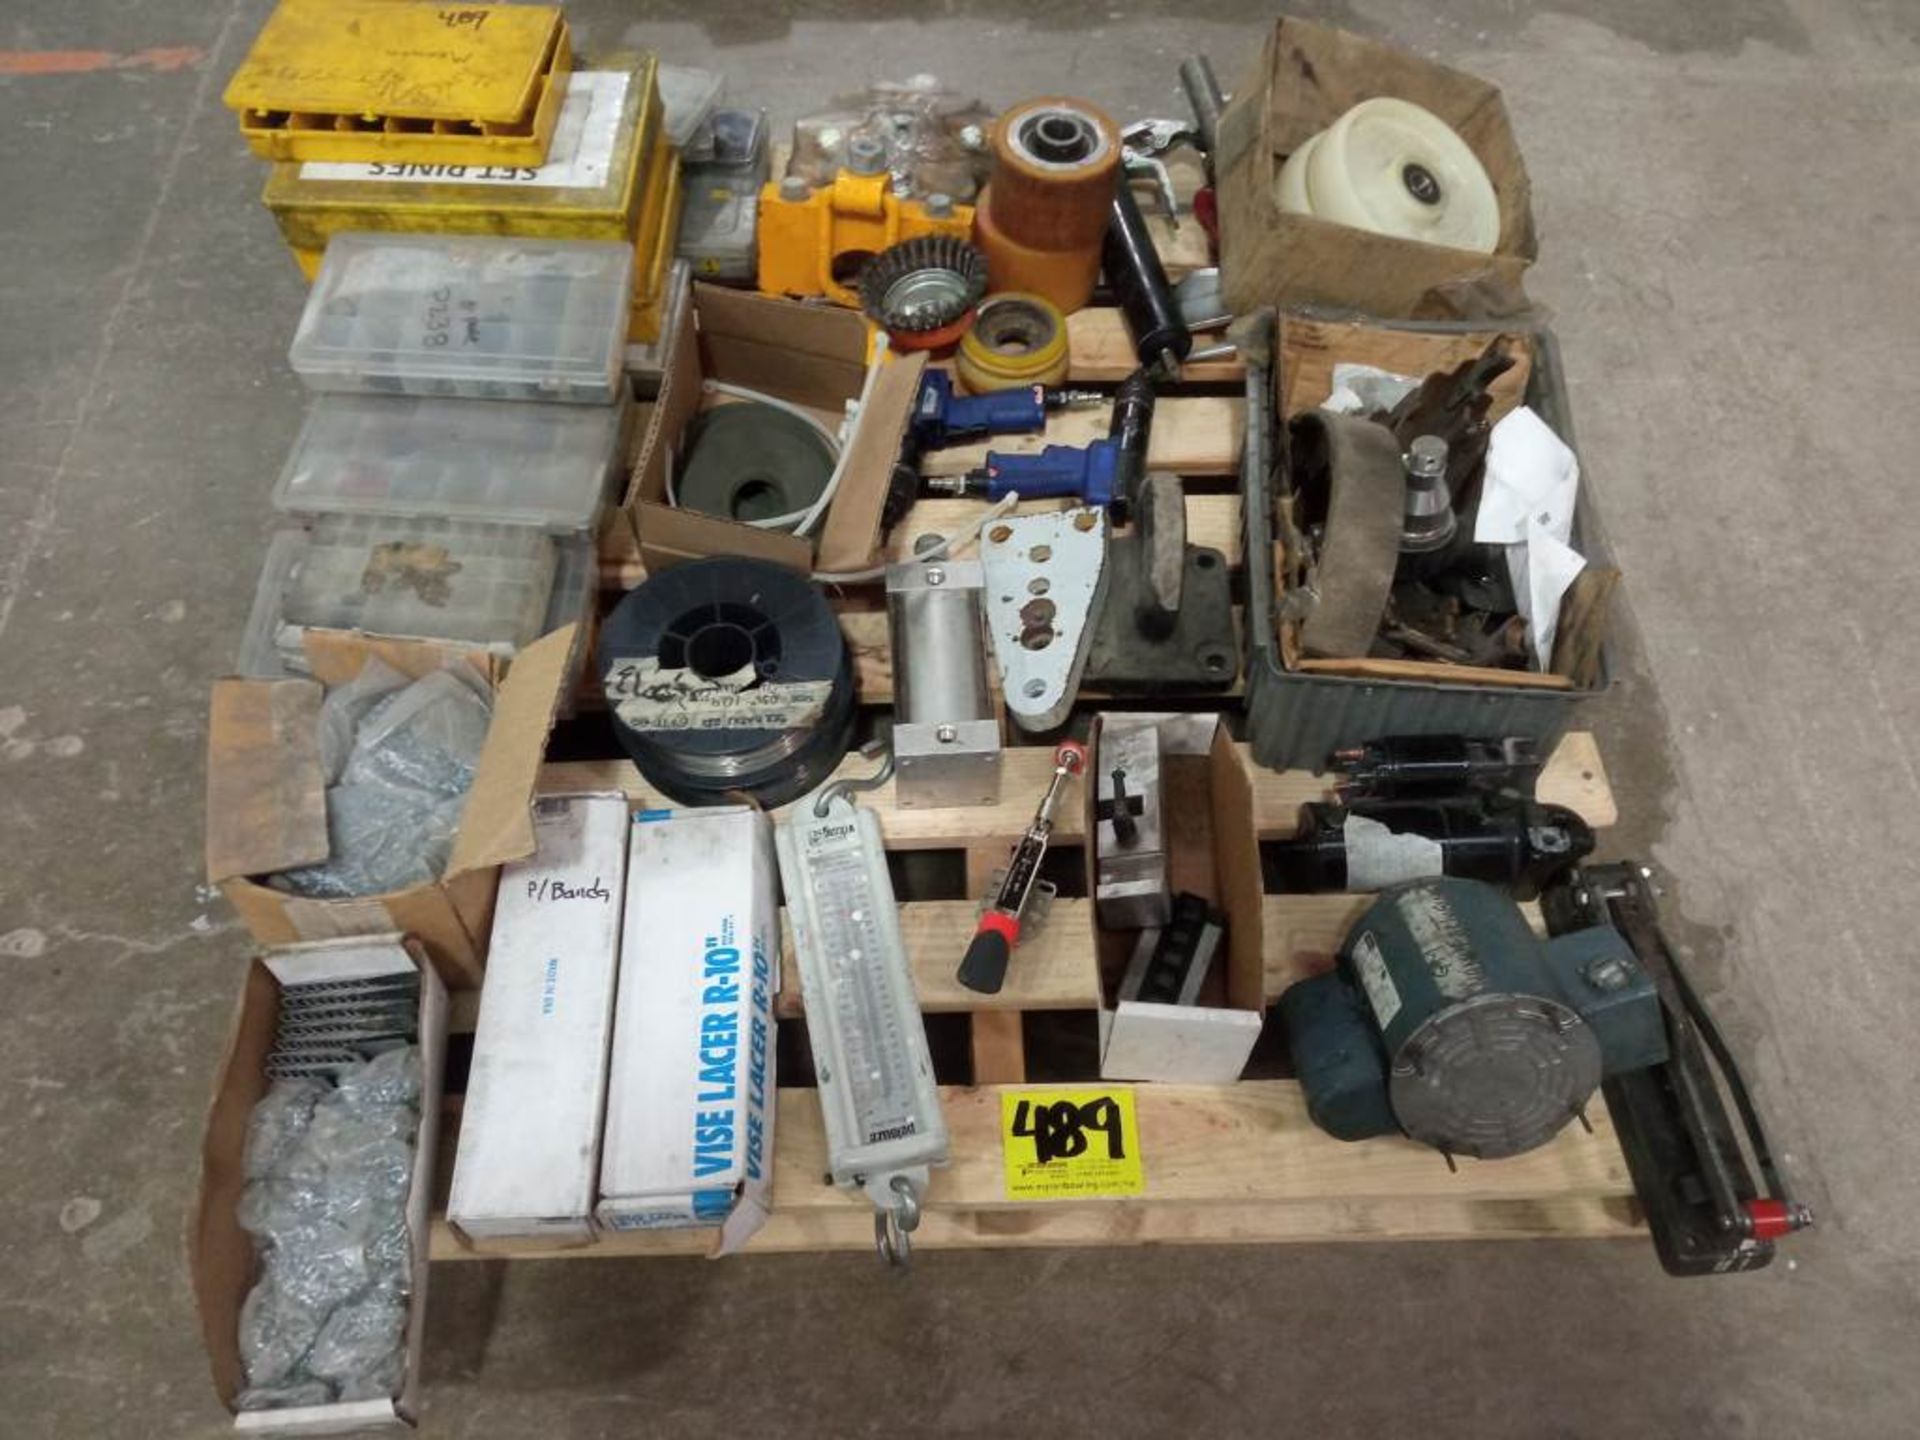 Lot of diverse parts contains: Screws, starters, forklift pads, electrocos, staples, gaskets, pneum